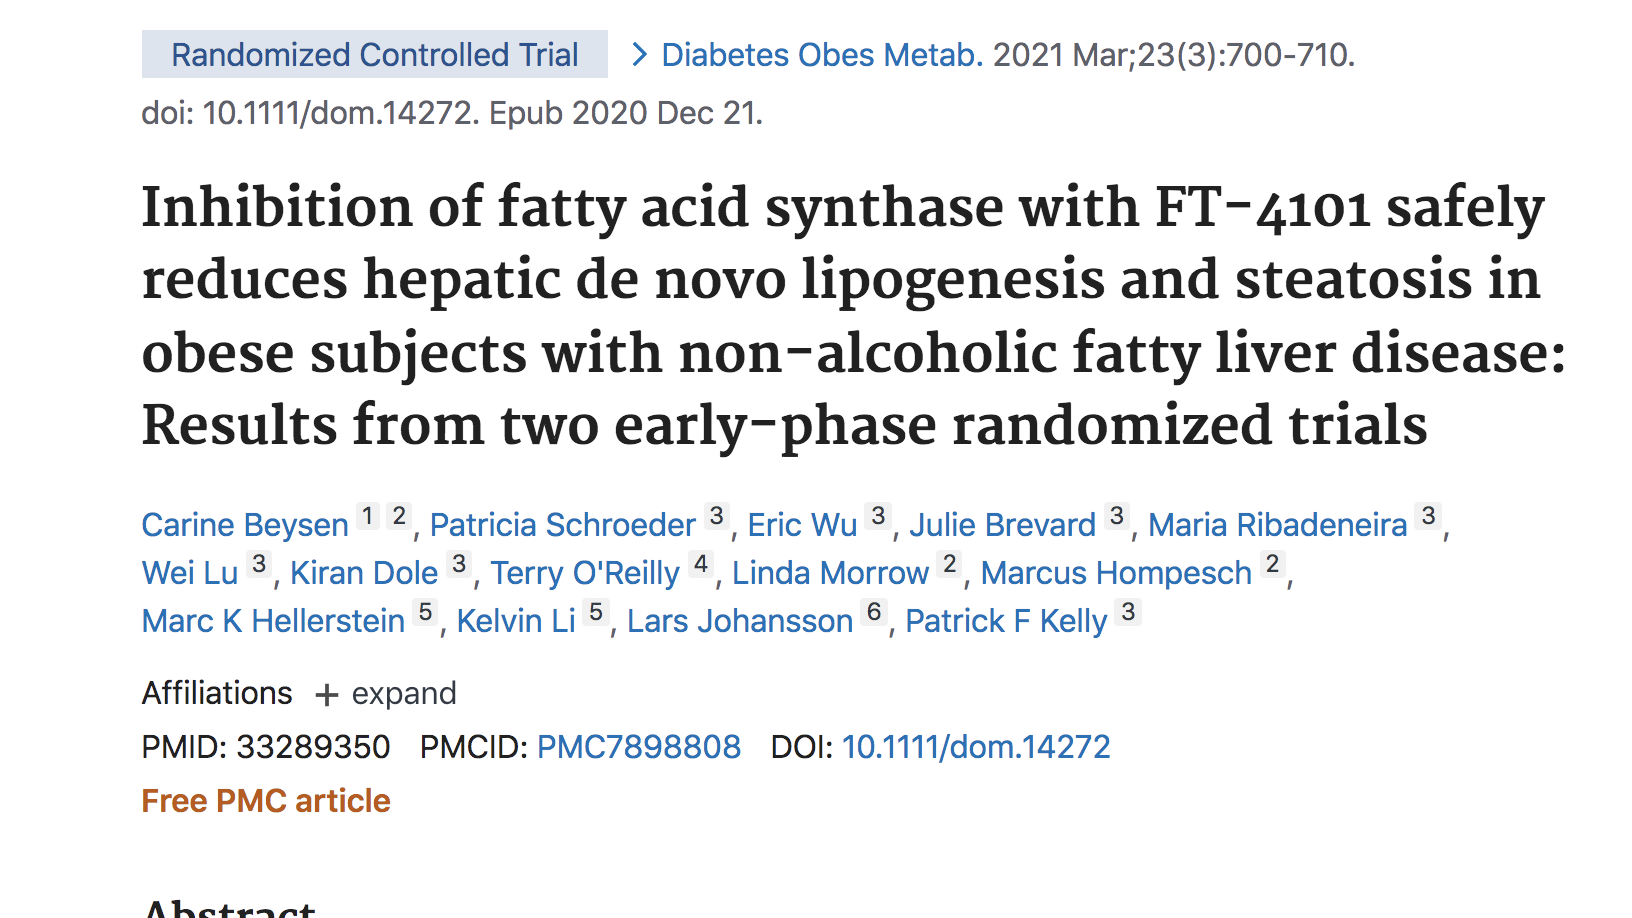 Inhibition of fatty acid synthase with FT-4101 safely reduces hepatic de novo lipogenesis and steatosis in obese subjects with NAFLD non-alcoholic fatty liver disease: results from two early thumbnail